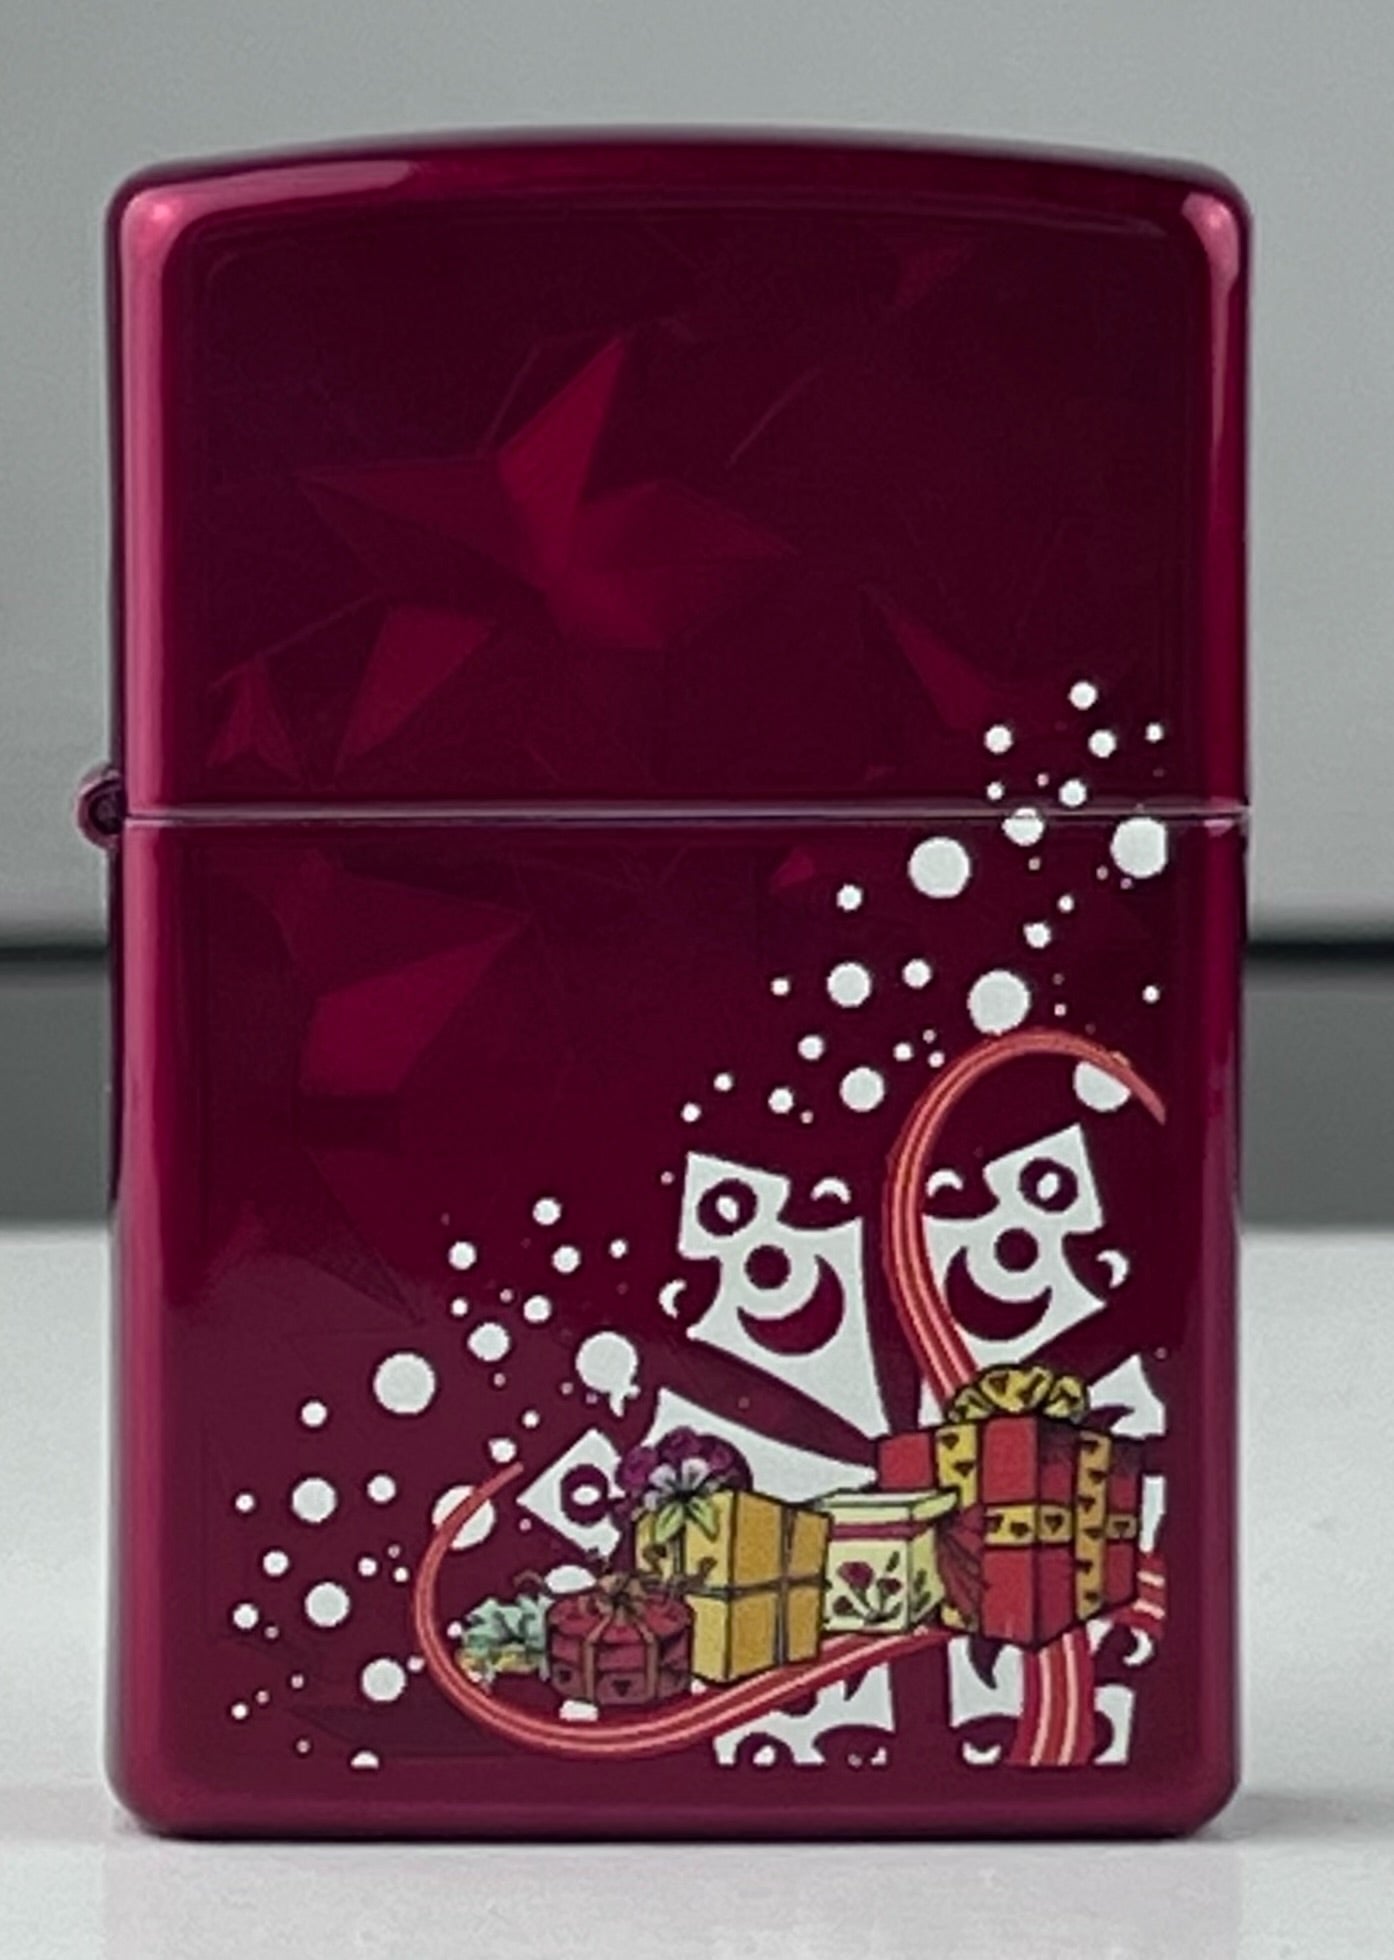 Zippo Celebrate The Season 2014 Iced Candy Apple Red